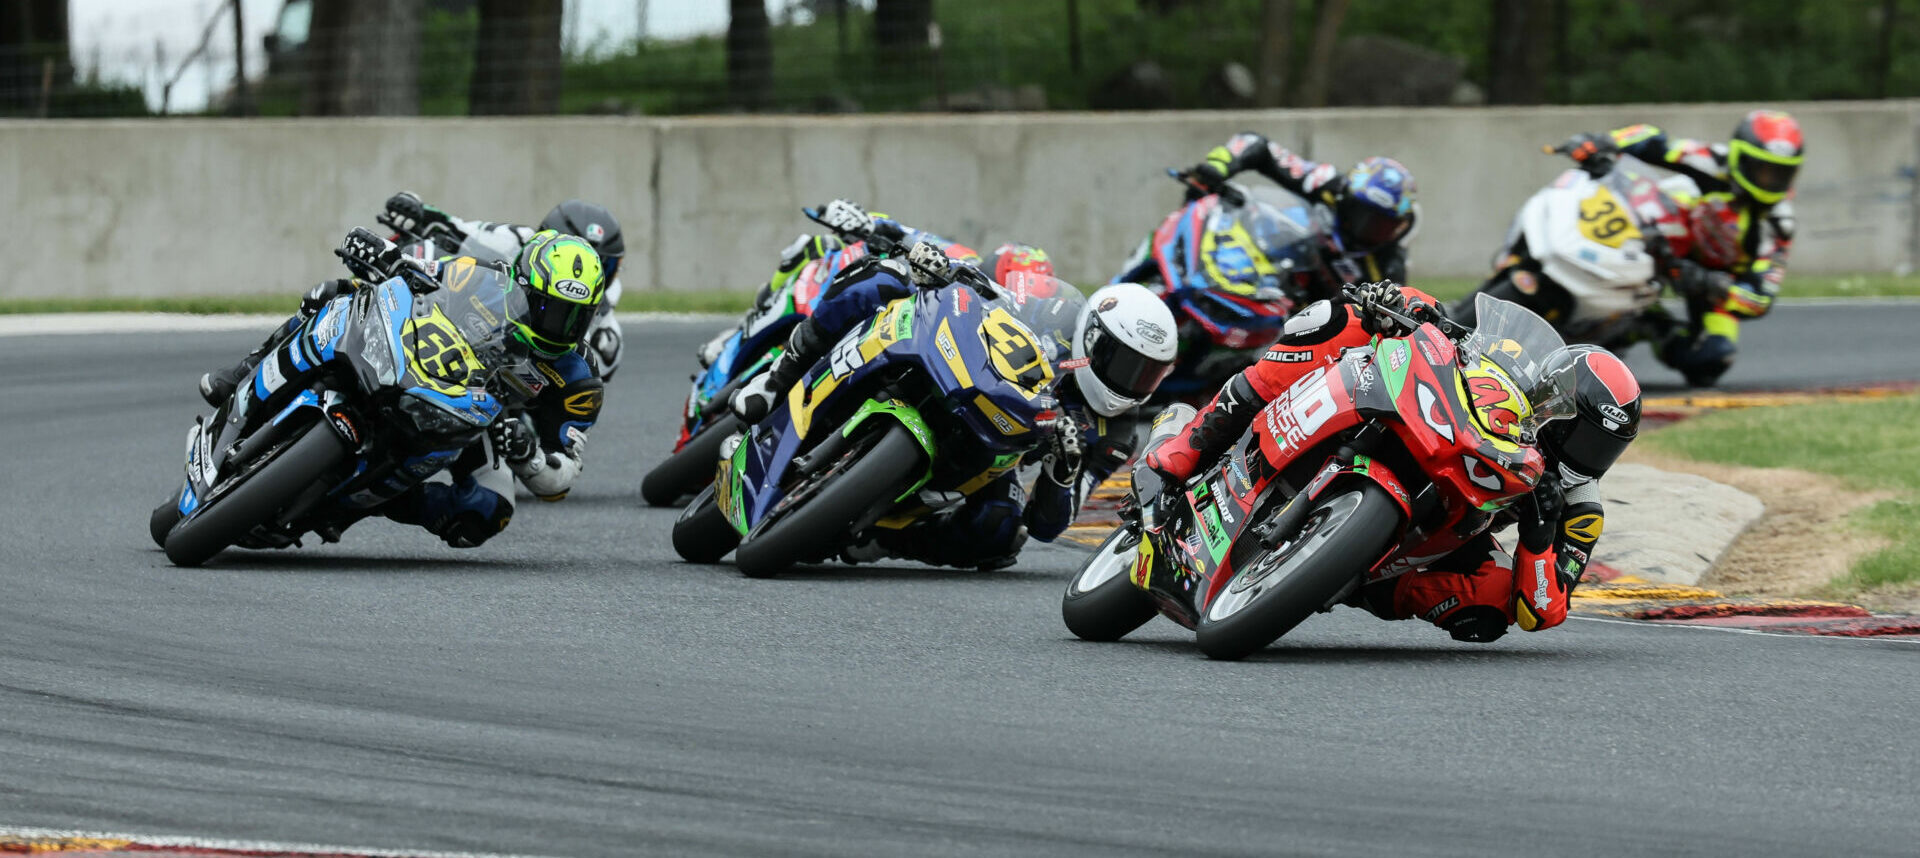 The SportbikeTrackGear.com Junior Cup class promises plenty of action at the front with the MotoAmerica Championship visiting Ridge Motorsports Park in Shelton, Washington, this weekend. Photo by Brian J. Nelson, courtesy MotoAmerica.